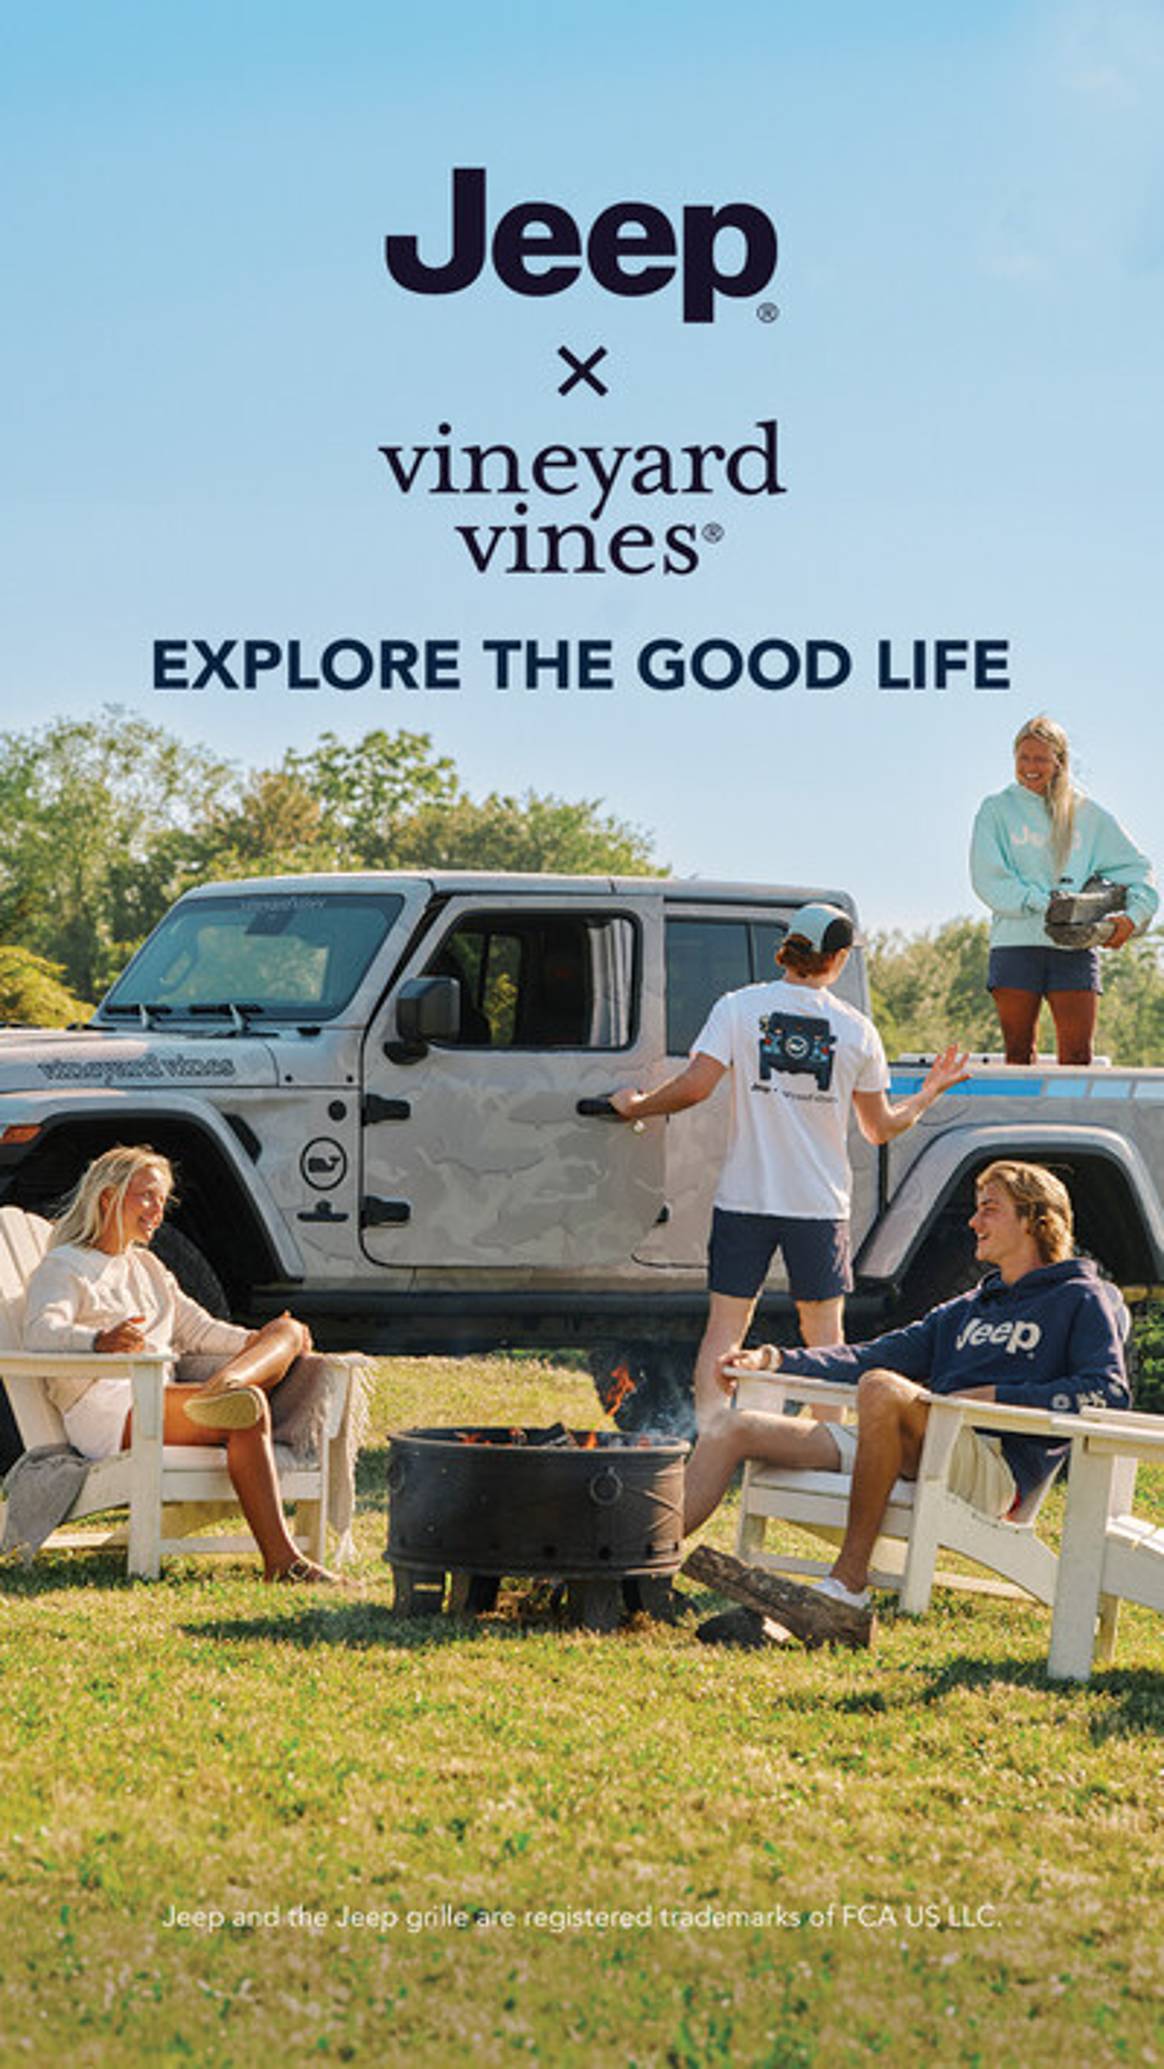 VINEYARD VINES ANNOUNCES FIRST-EVER COLLABORATION WITH JEEP